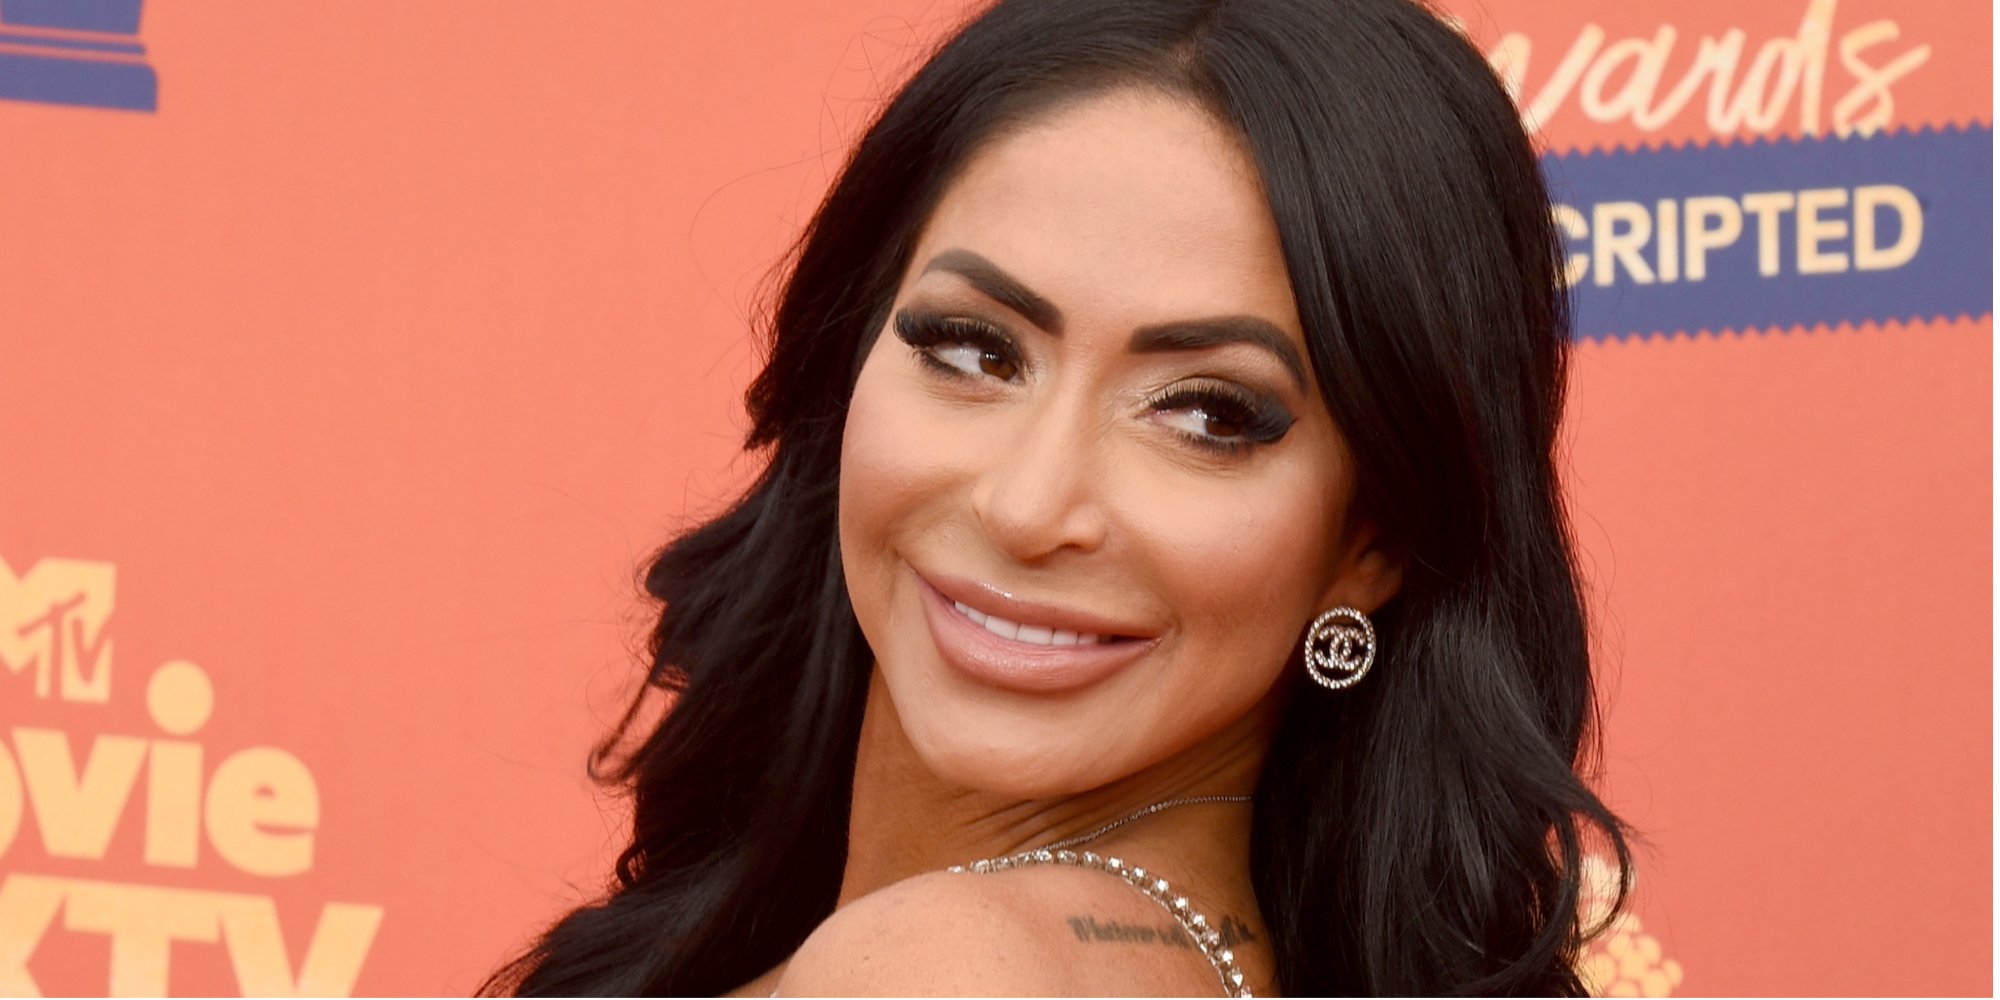 Angelina Pivarnick, star of 'Jersey Shore: Family Vacation' star on the red carpet at the MTV Movie Awards.